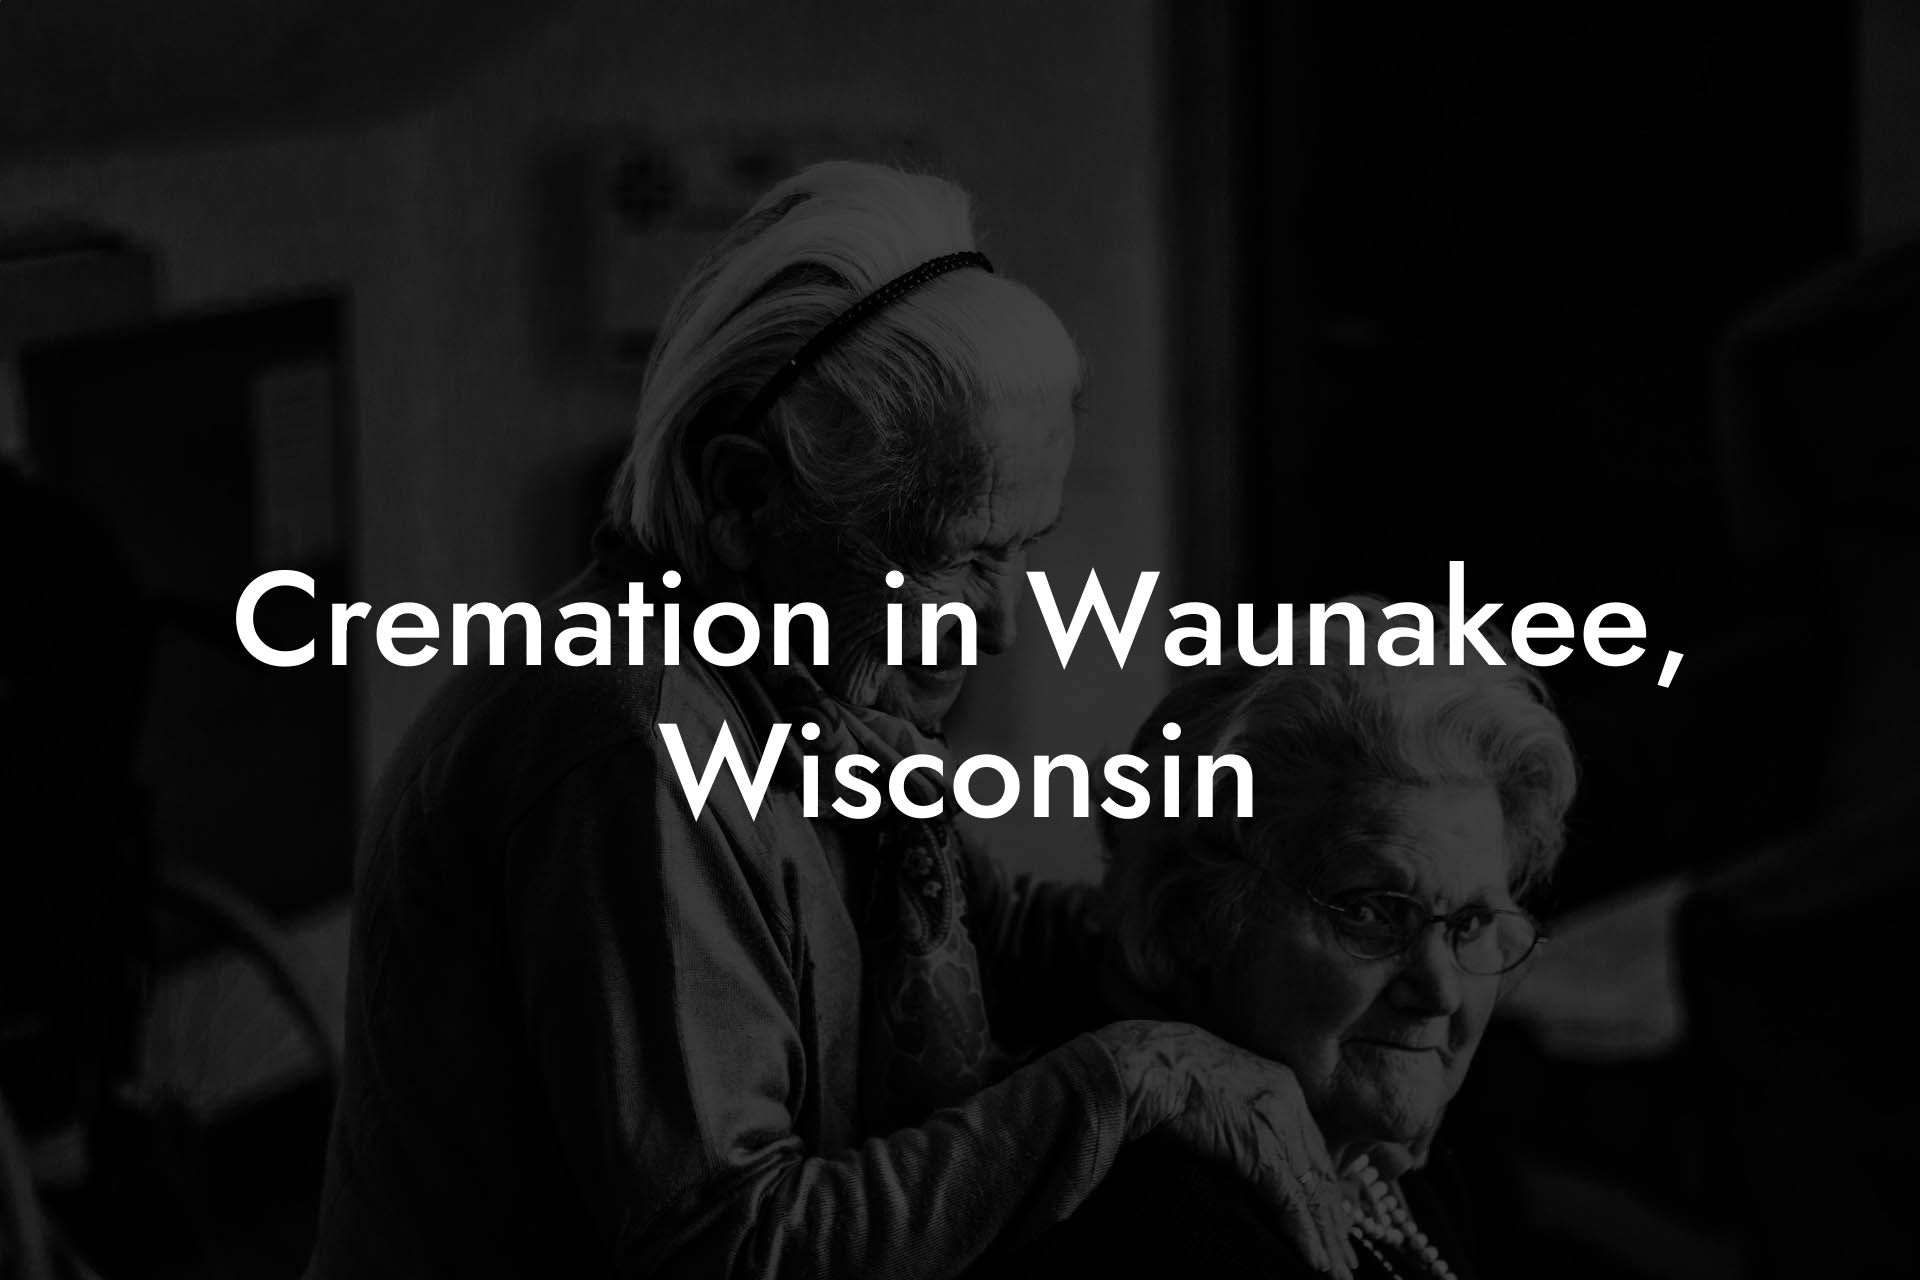 Cremation in Waunakee, Wisconsin